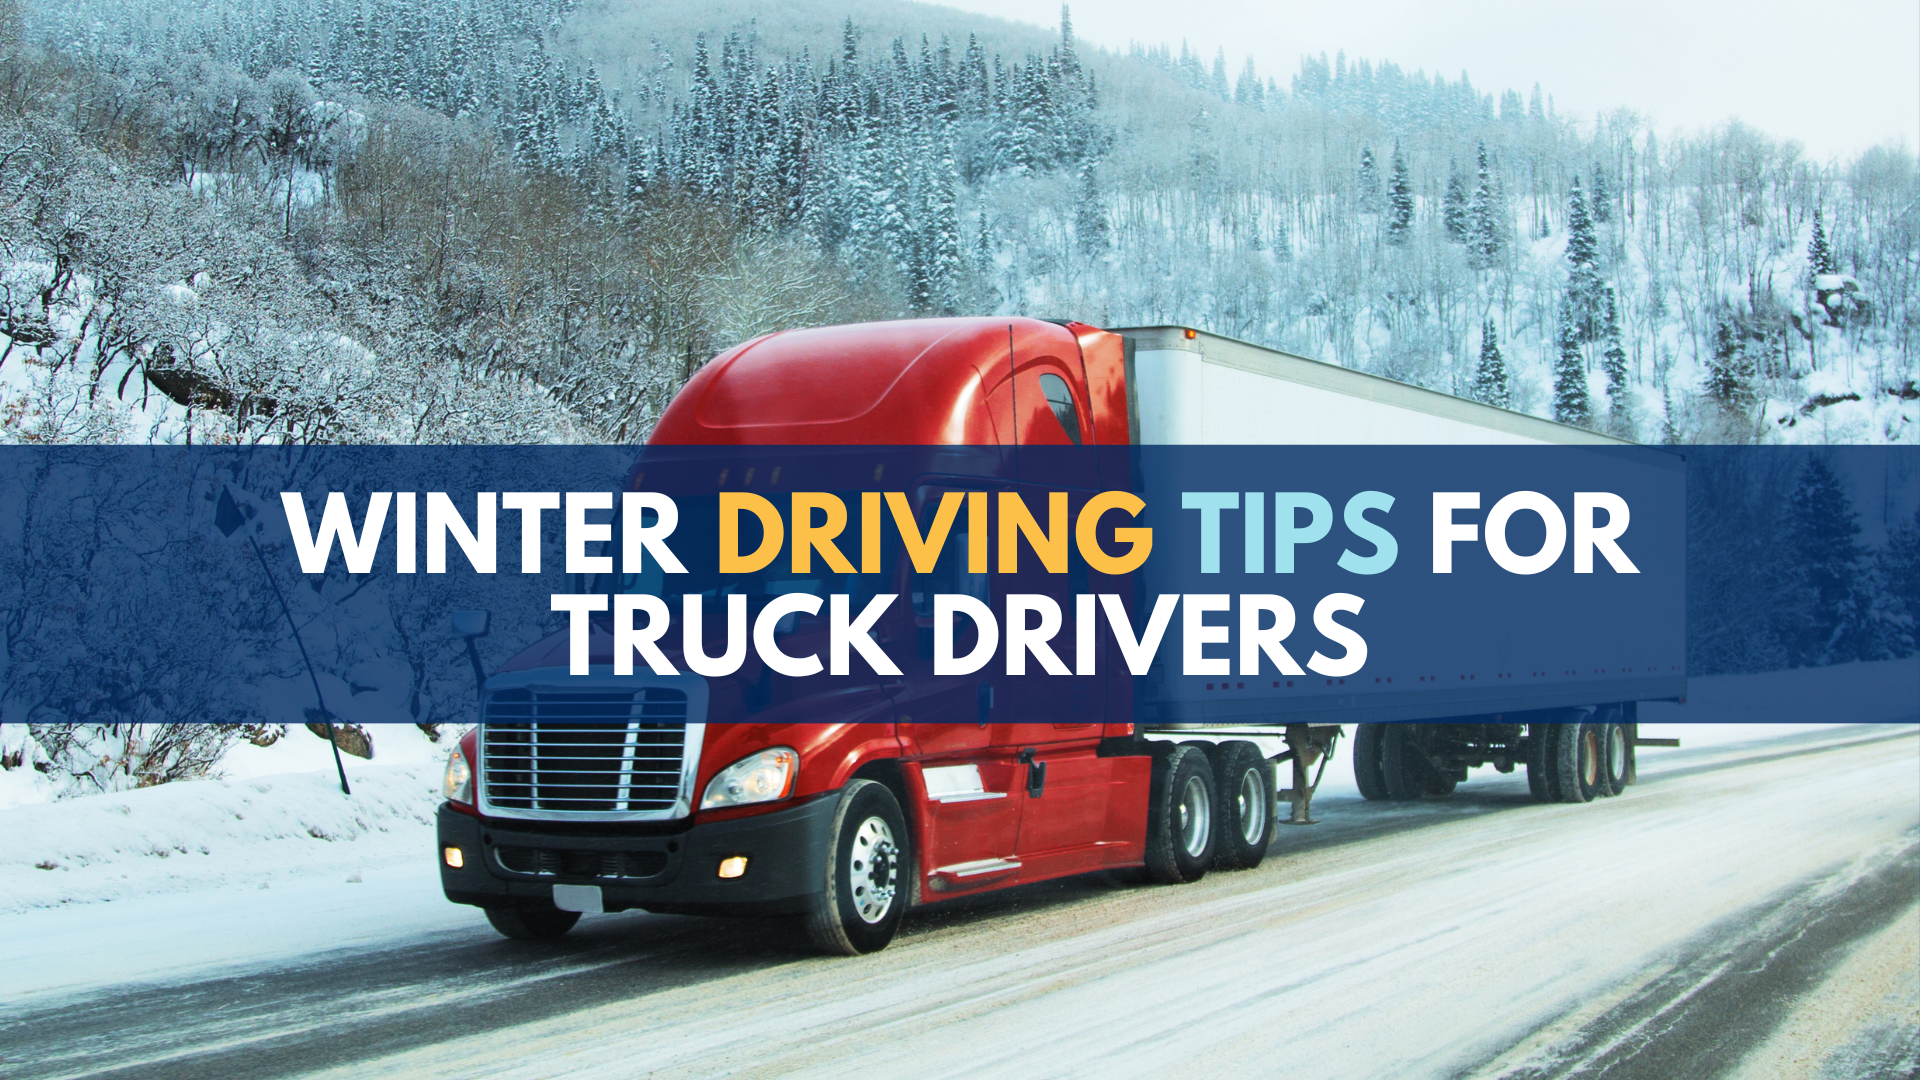 Winter driving tips for truck drivers